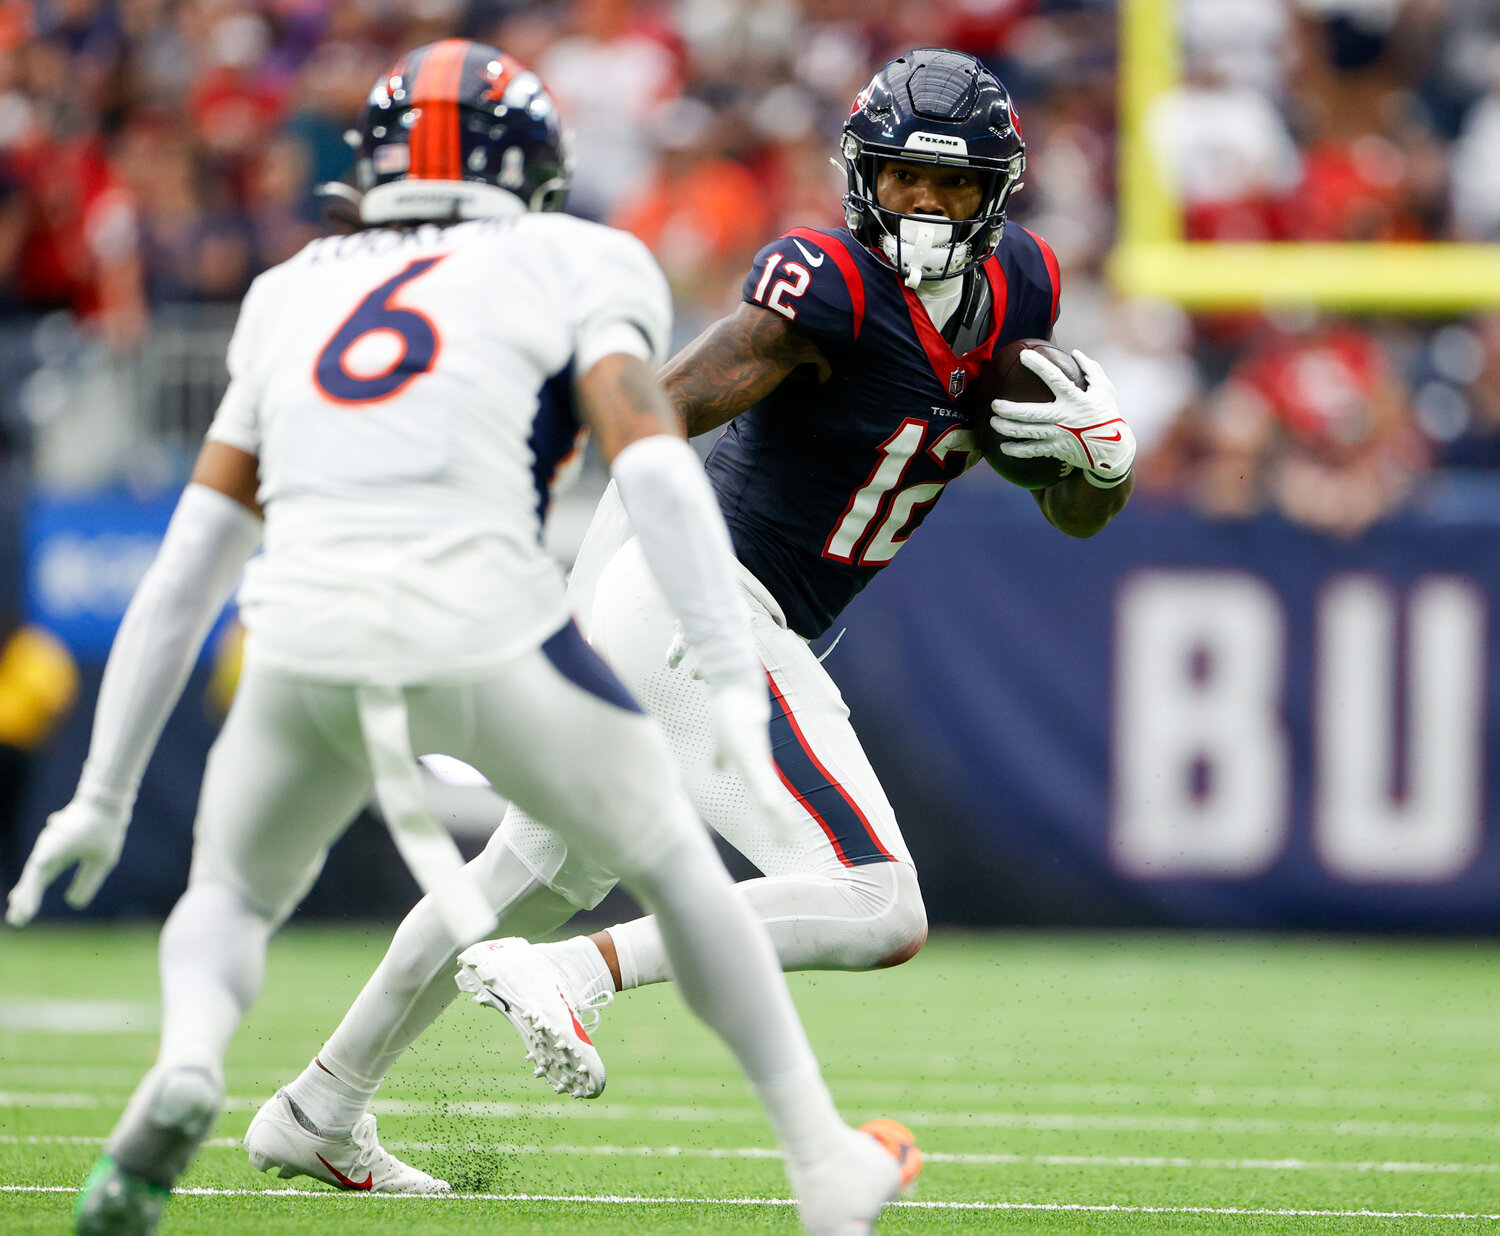 Texans wide receiver Nico Collins (12) carries the ball after a catch during an NFL game between the Texans and the Broncos on December 3, 2023 in Houston. The Texans won, 22-17.